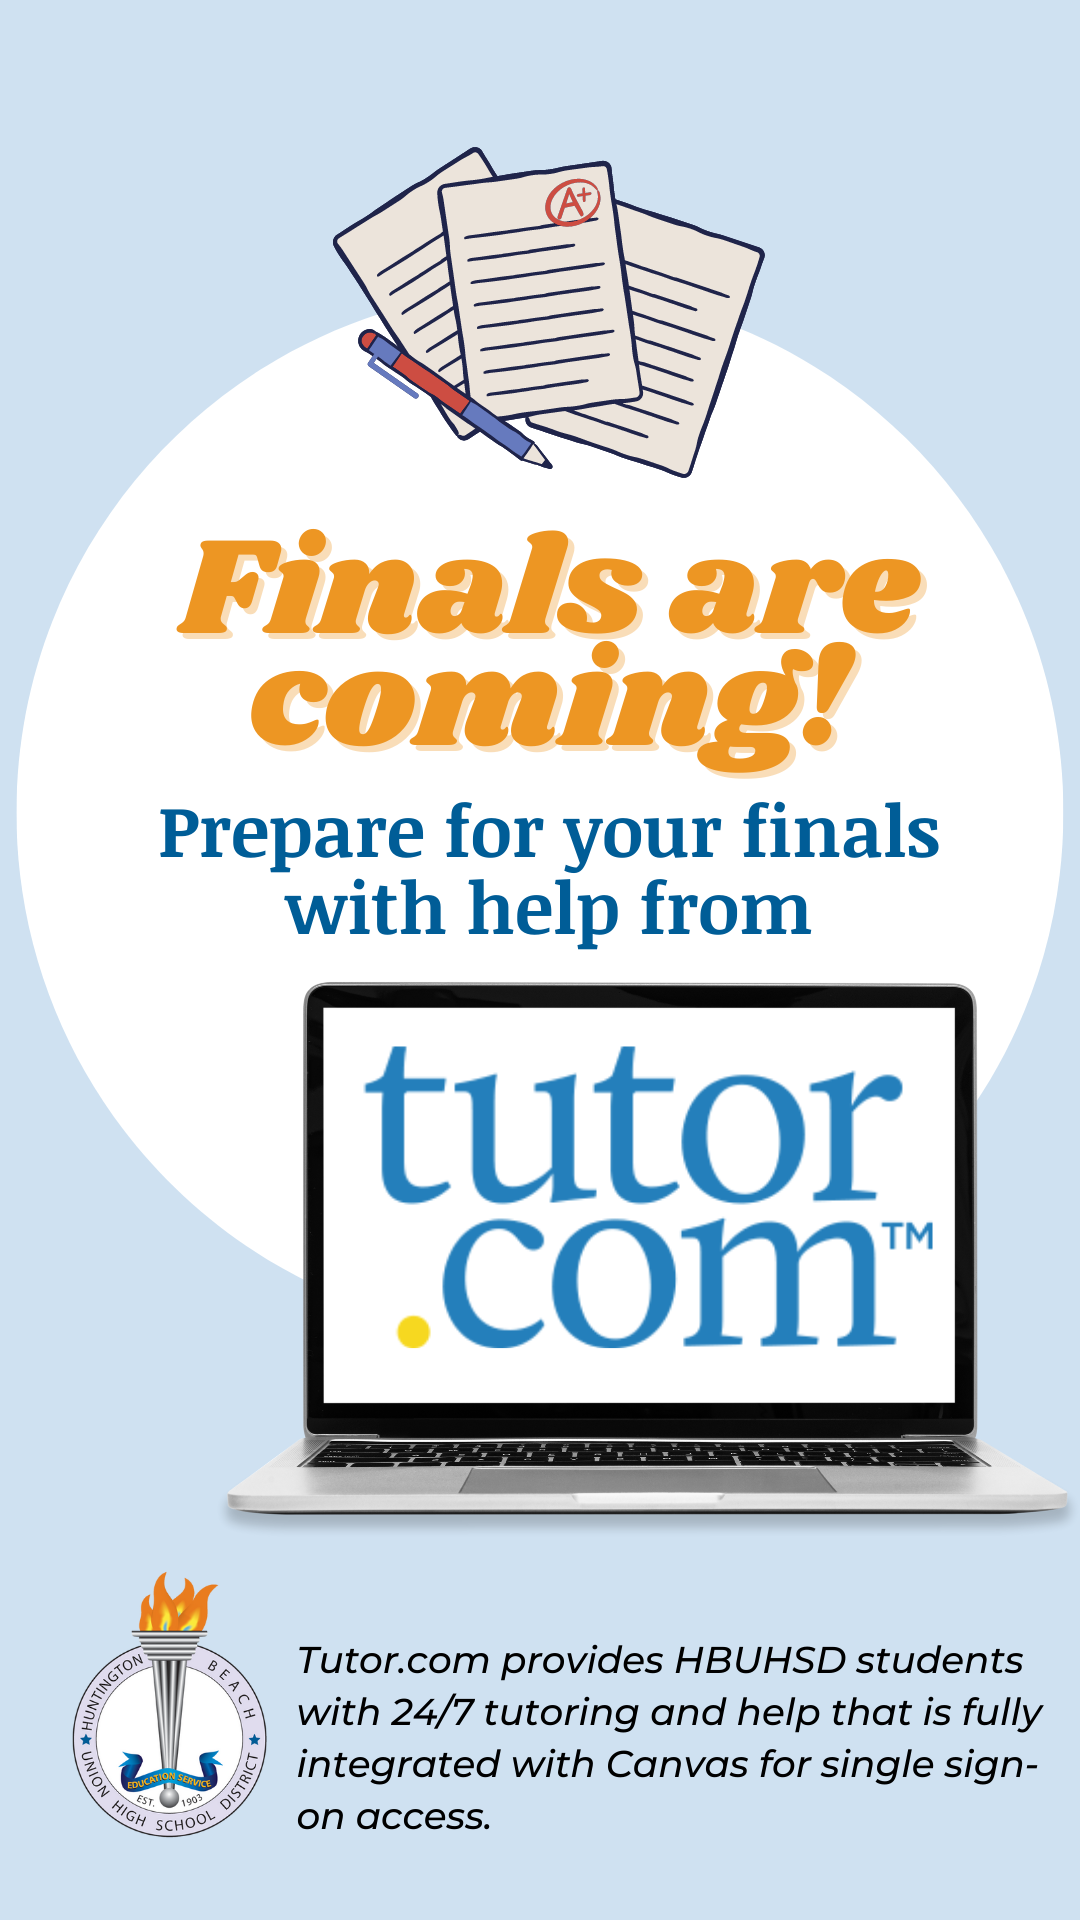 tutoring help during finals with tutor.com